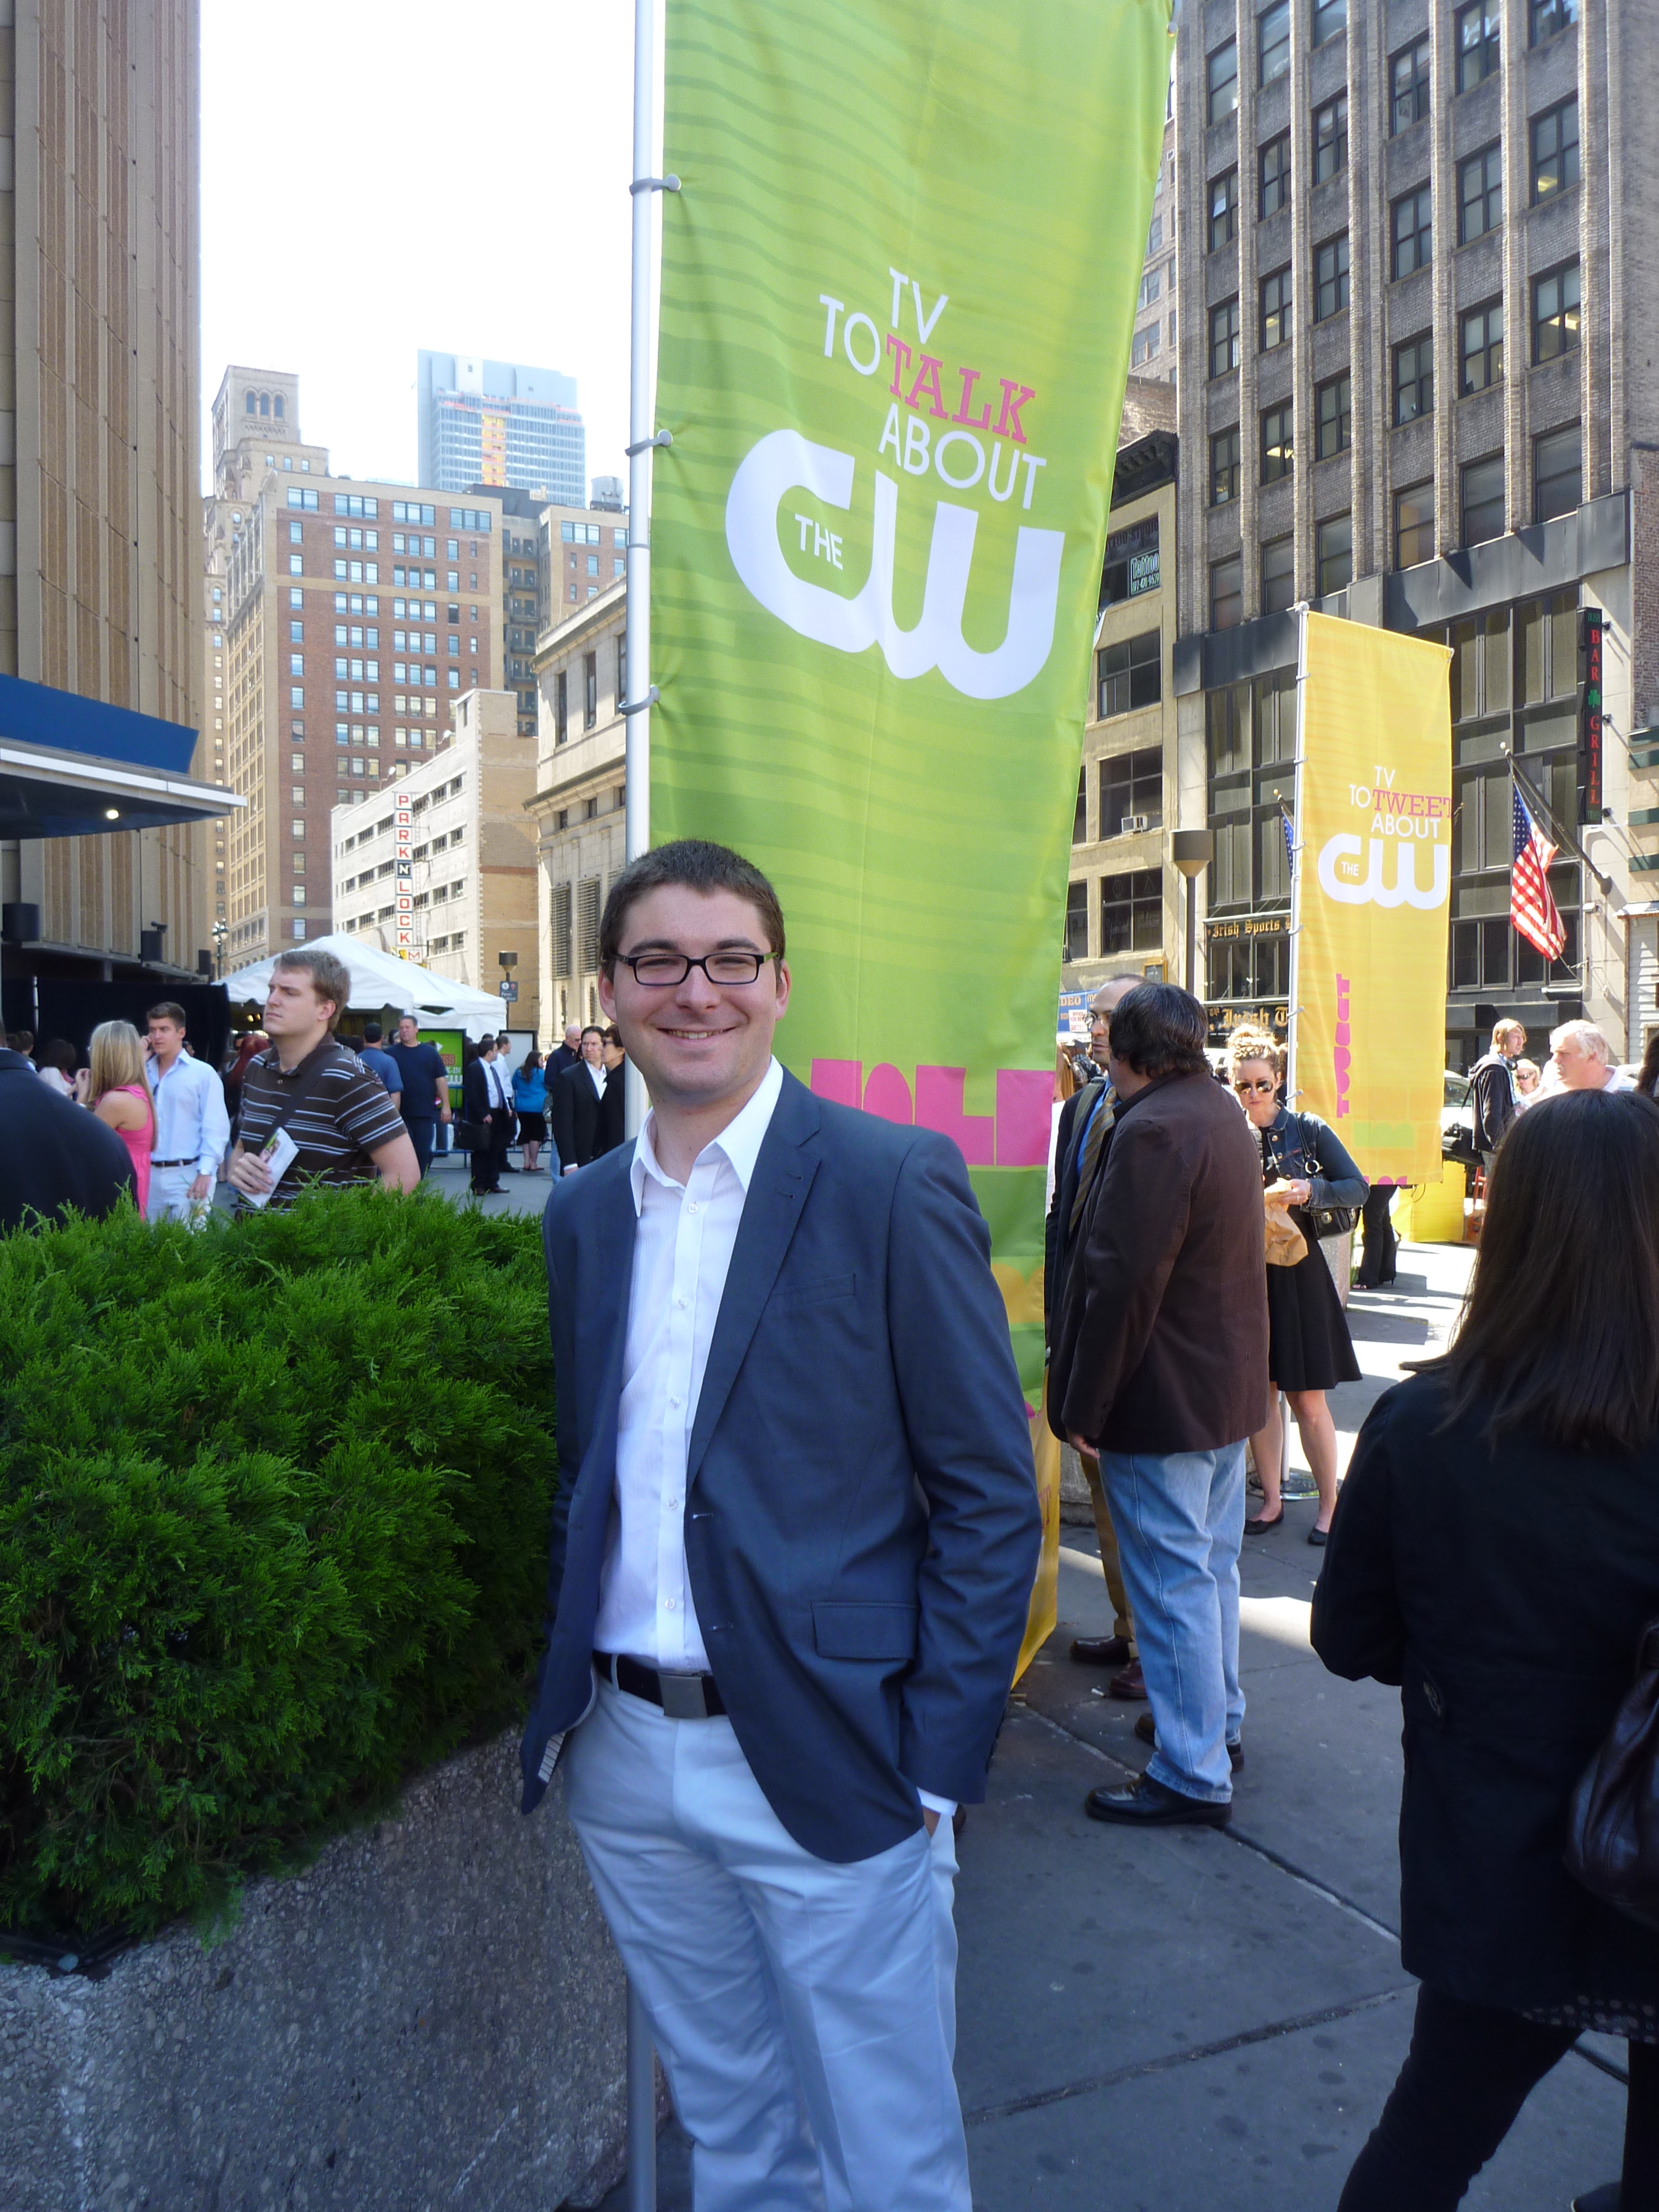 James Kicklighter at the 2010 CW Network Upfront Presentation at Madison Square Garden in New York City.